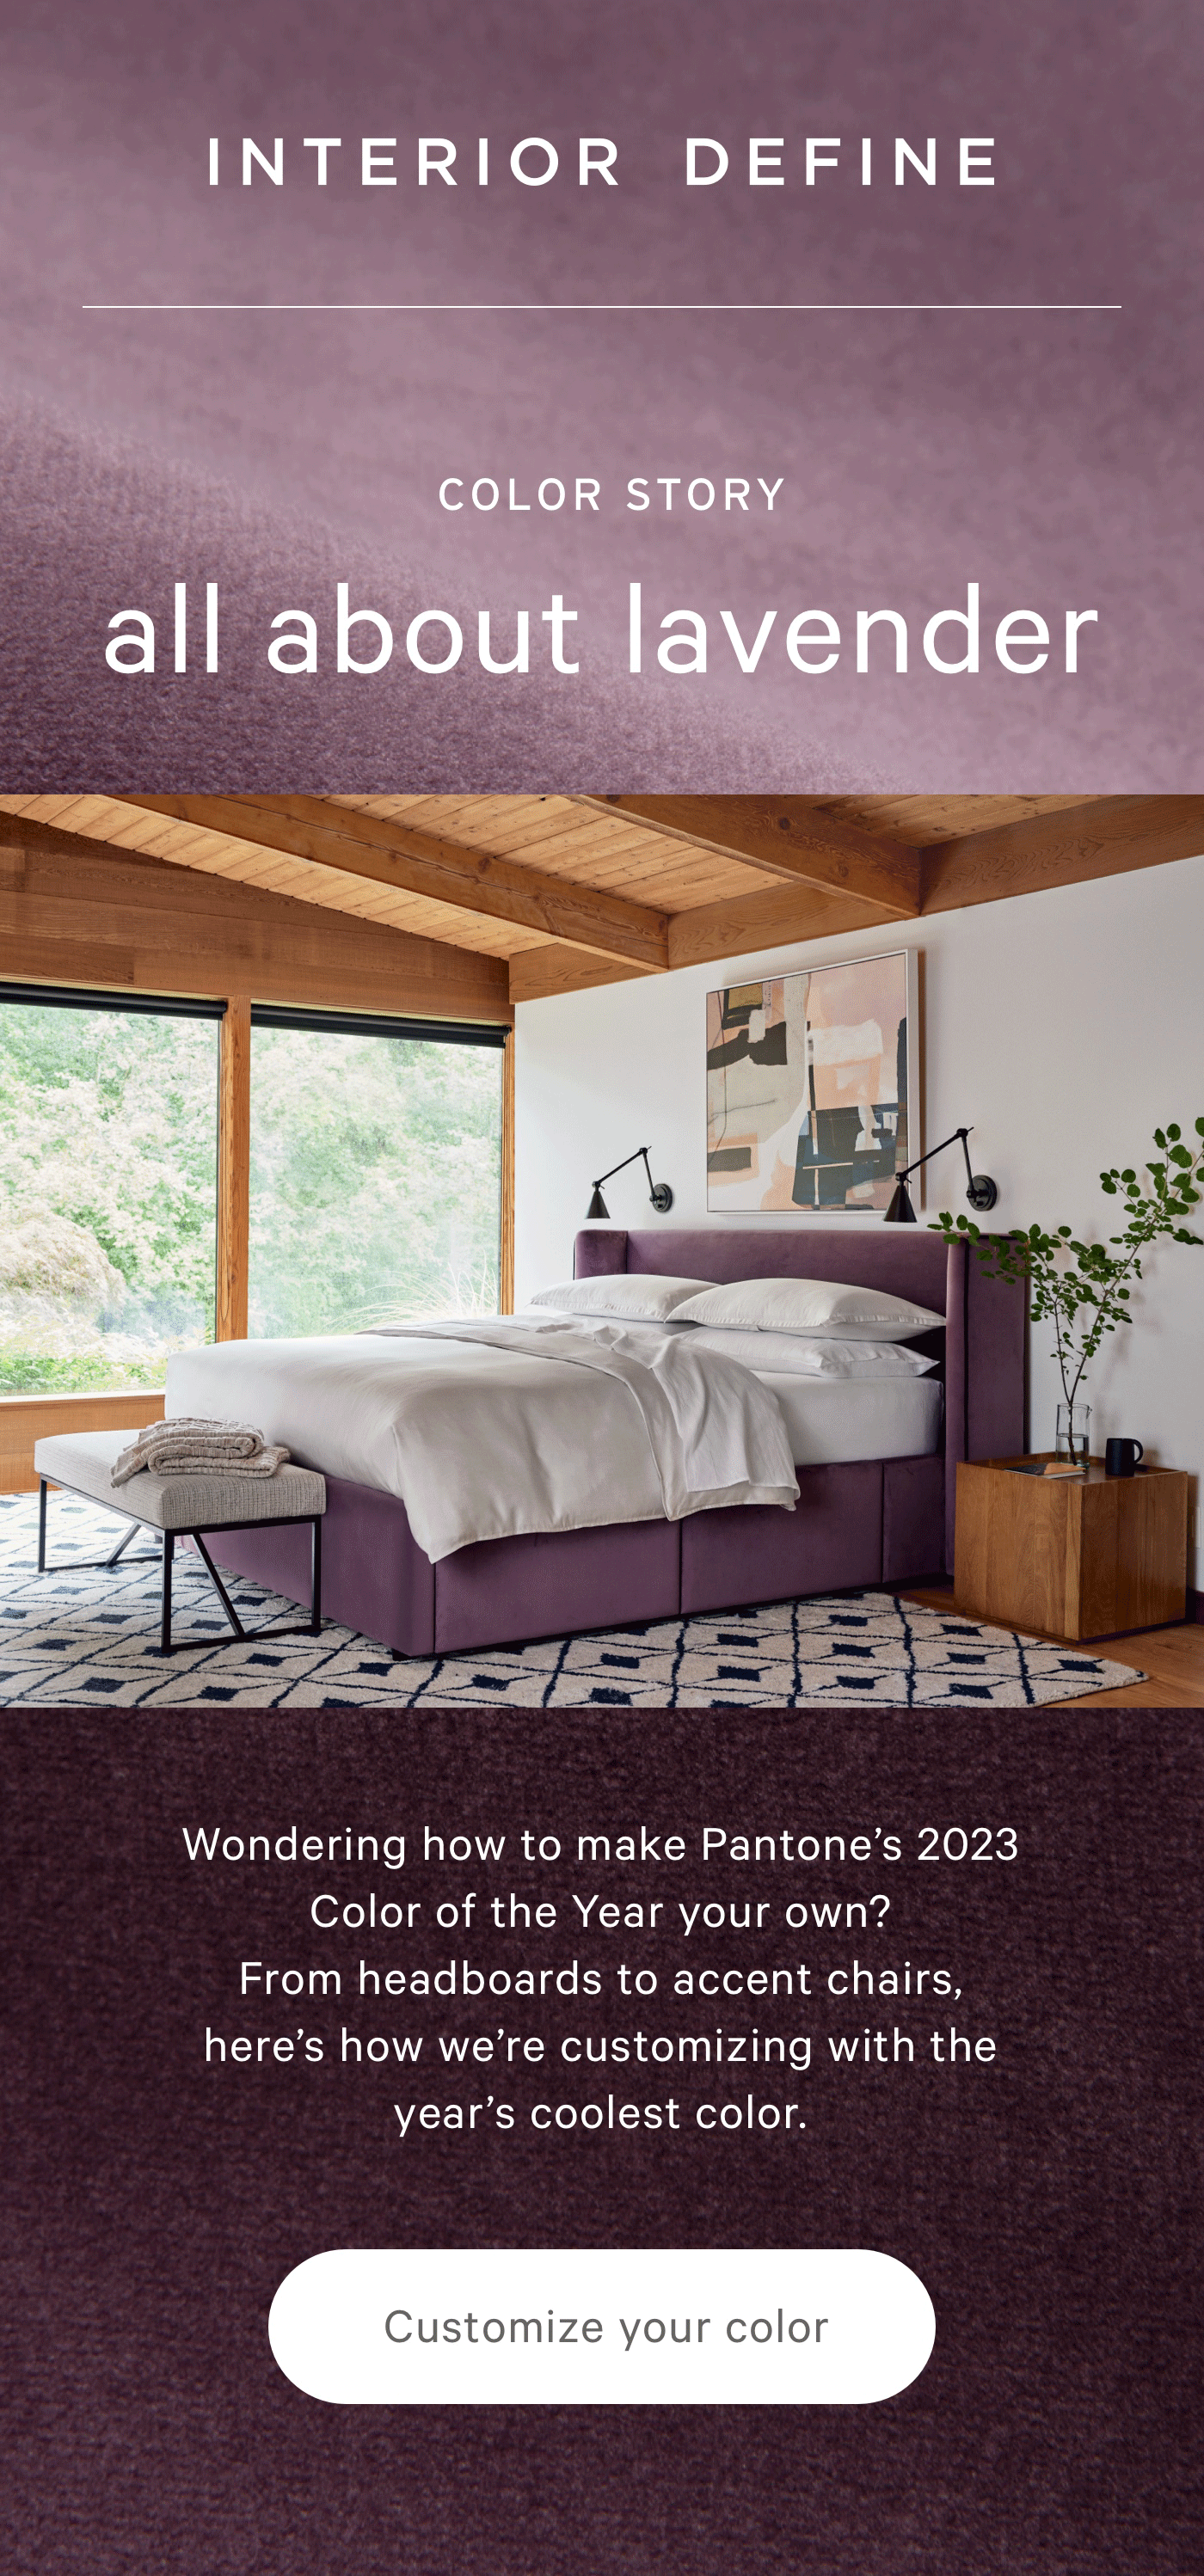 COLOR STORY all about lavender  Wondering how to make Pantone’s 2023 Color of the Year your own? From headboards to accent chairs, here’s how we’re customizing with the year’s coolest color.